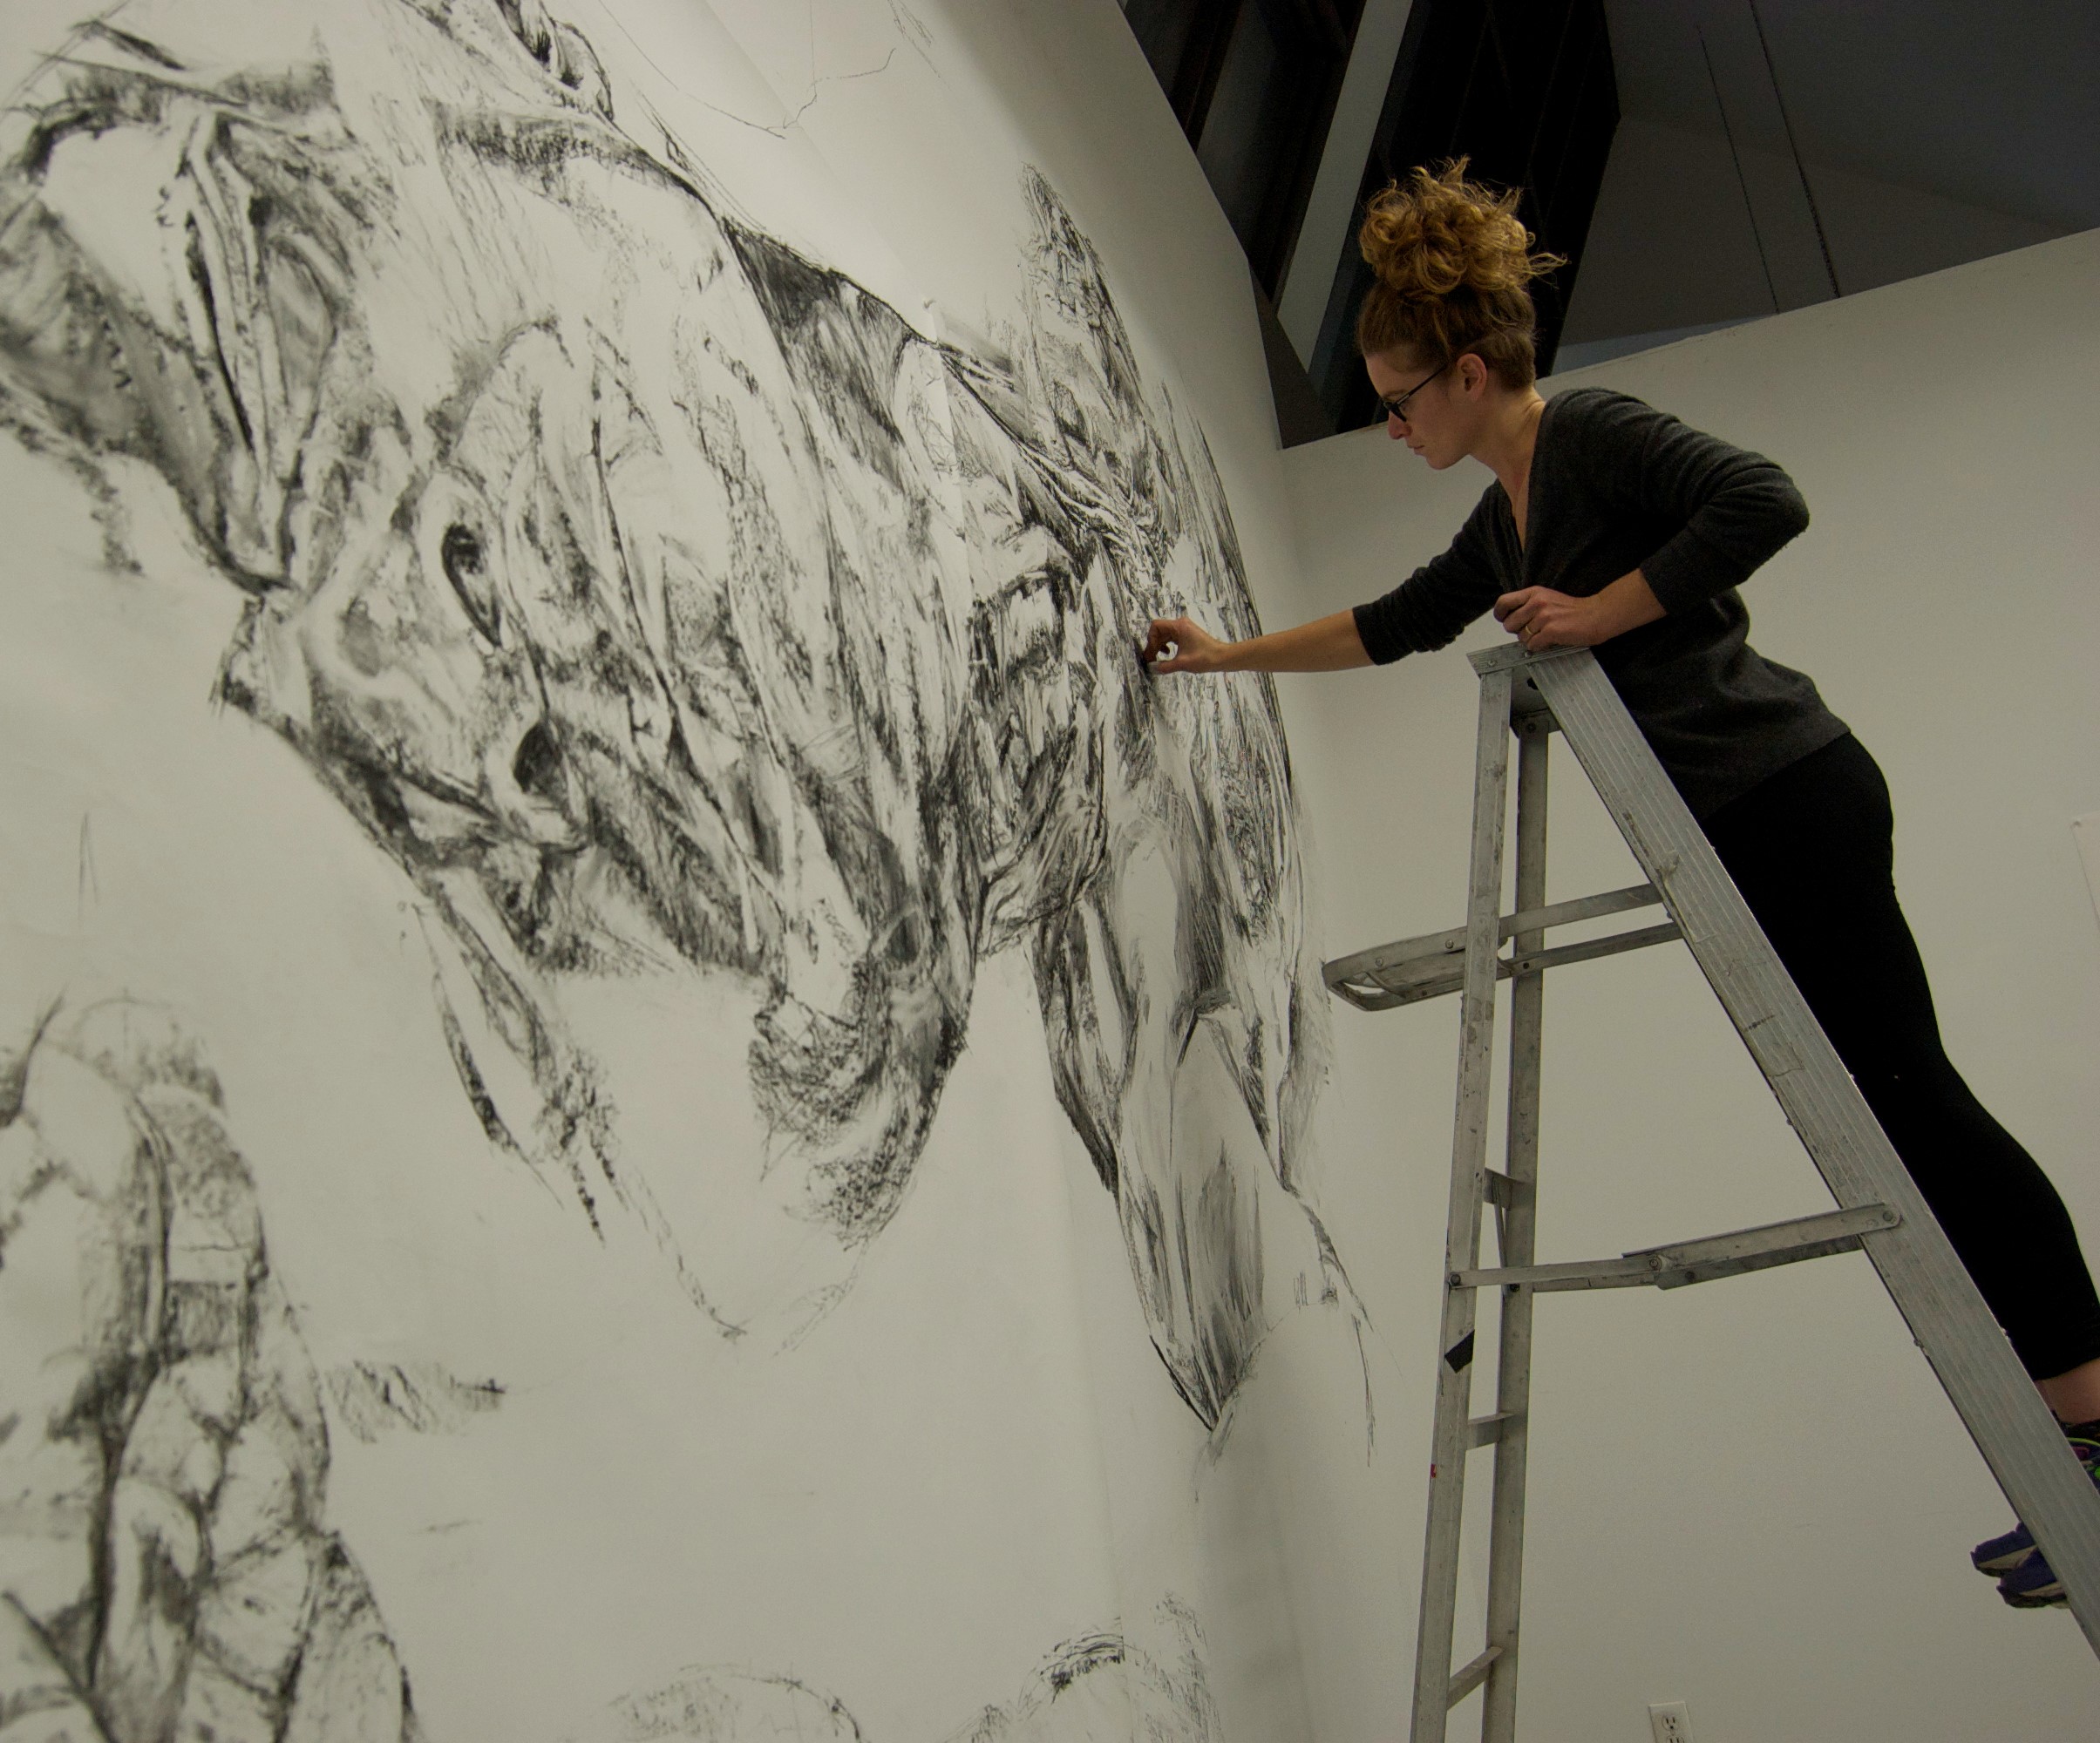 Esther McAdam standing on a ladder, drawing on a wall